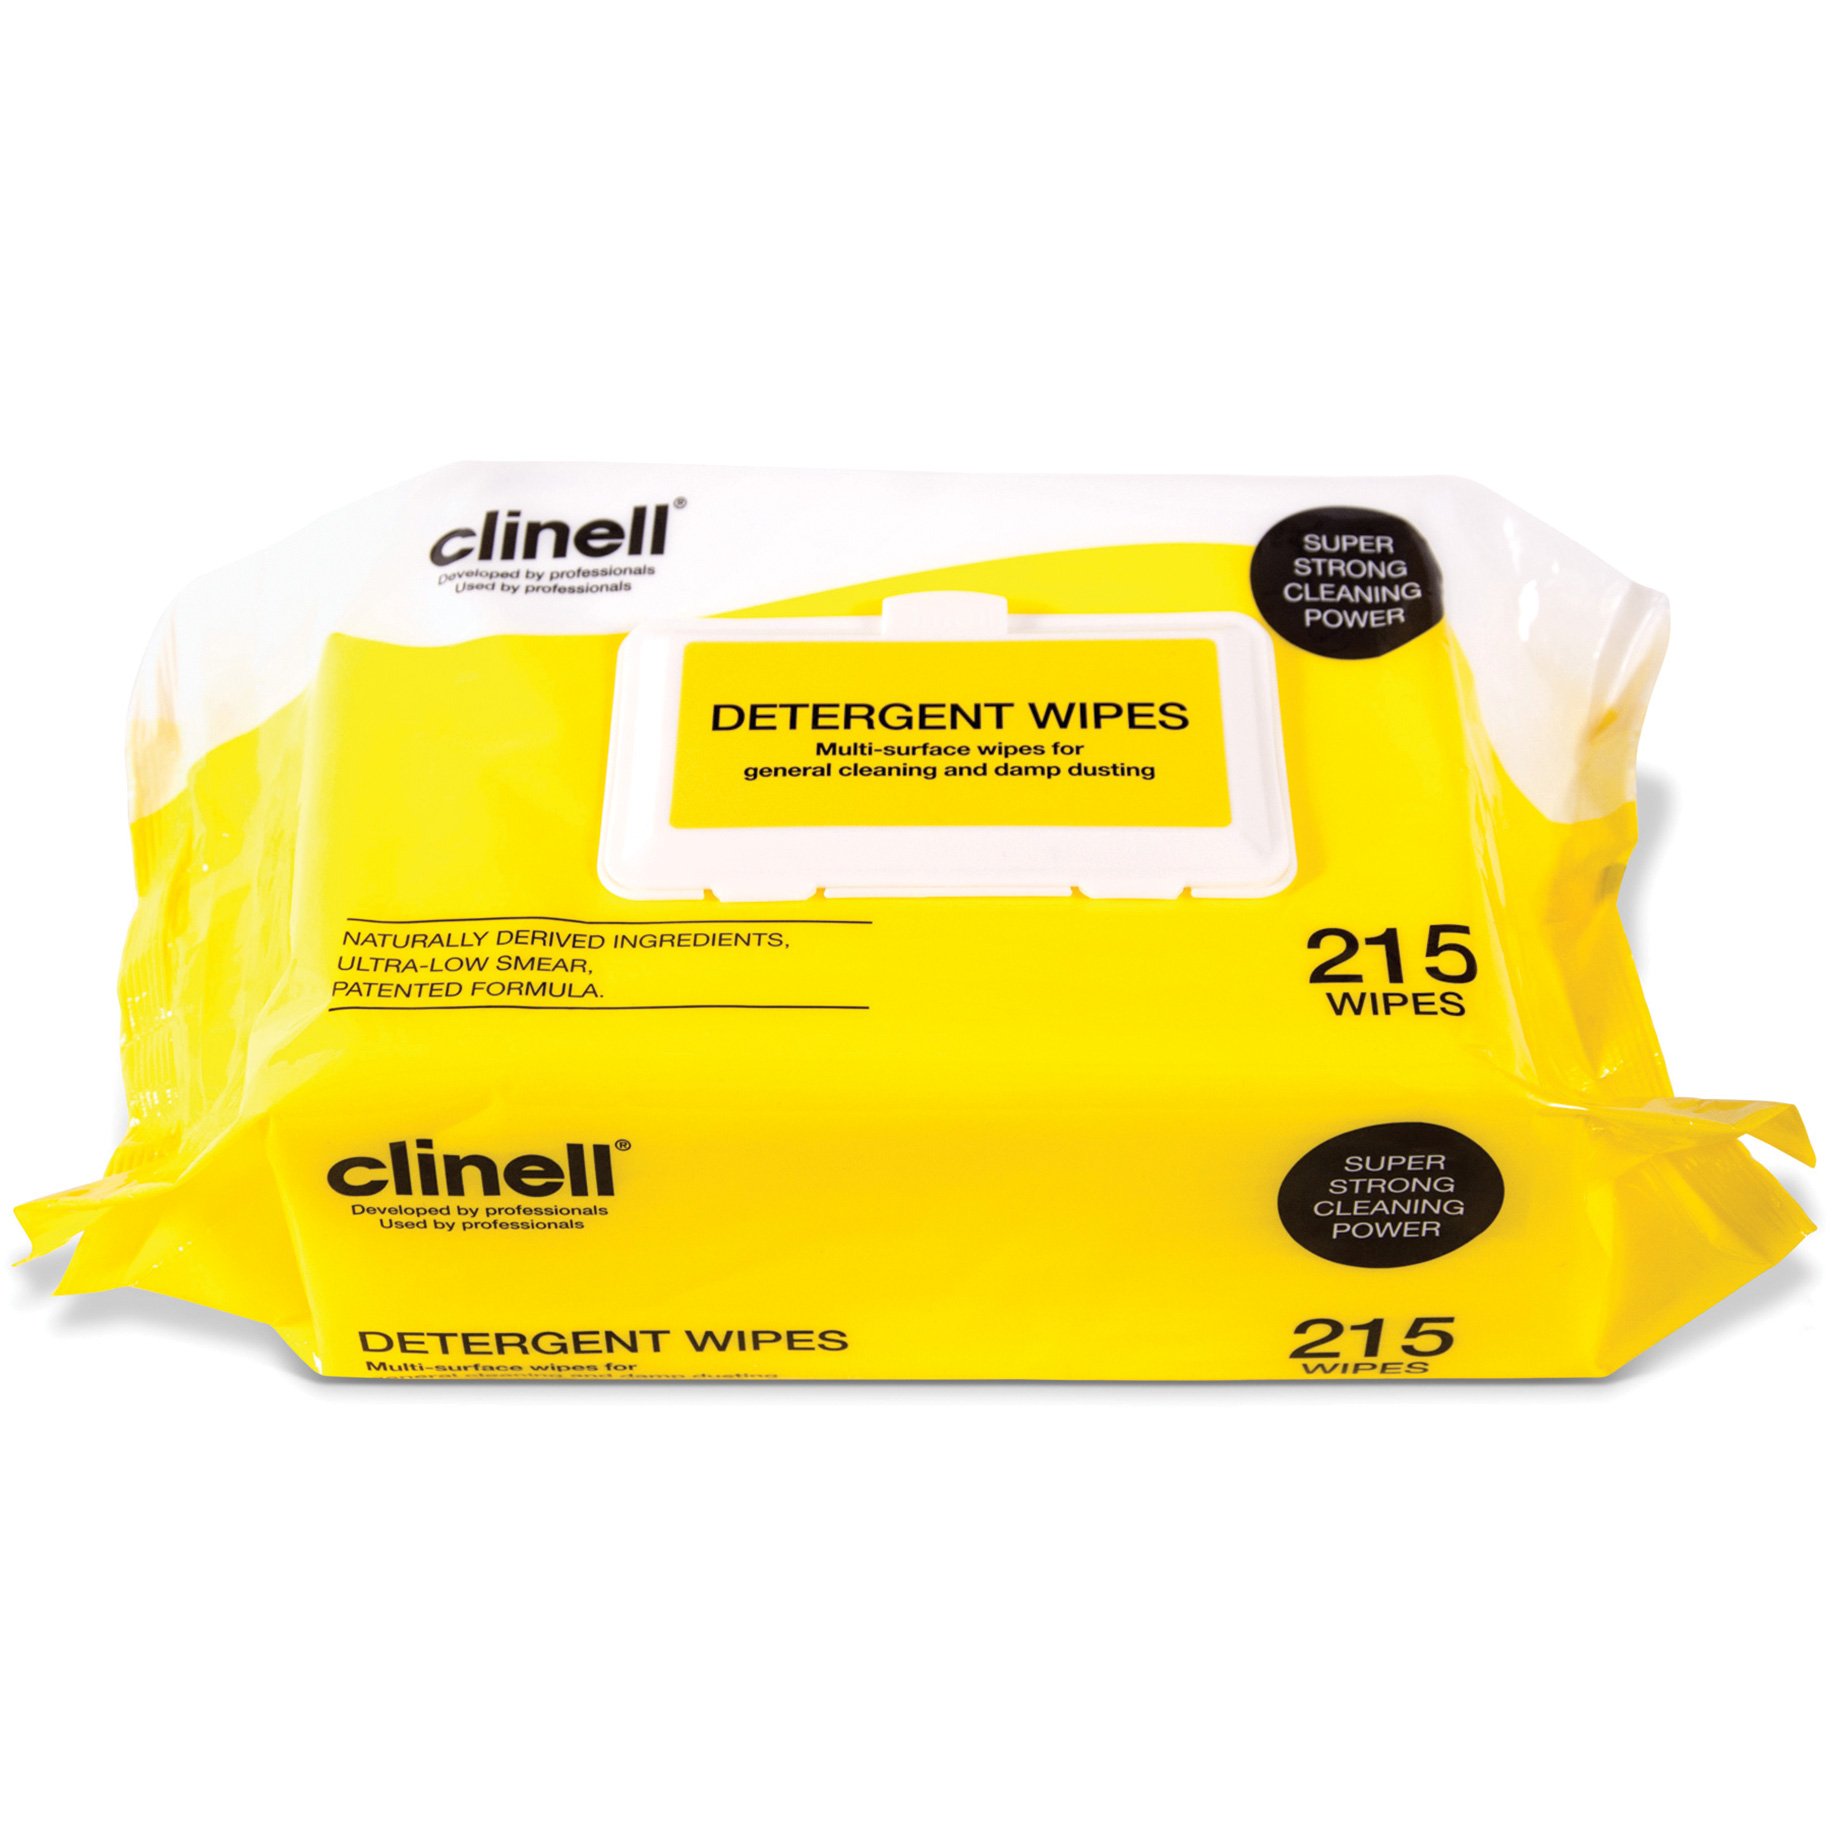 Clinell Detergent Wipes 